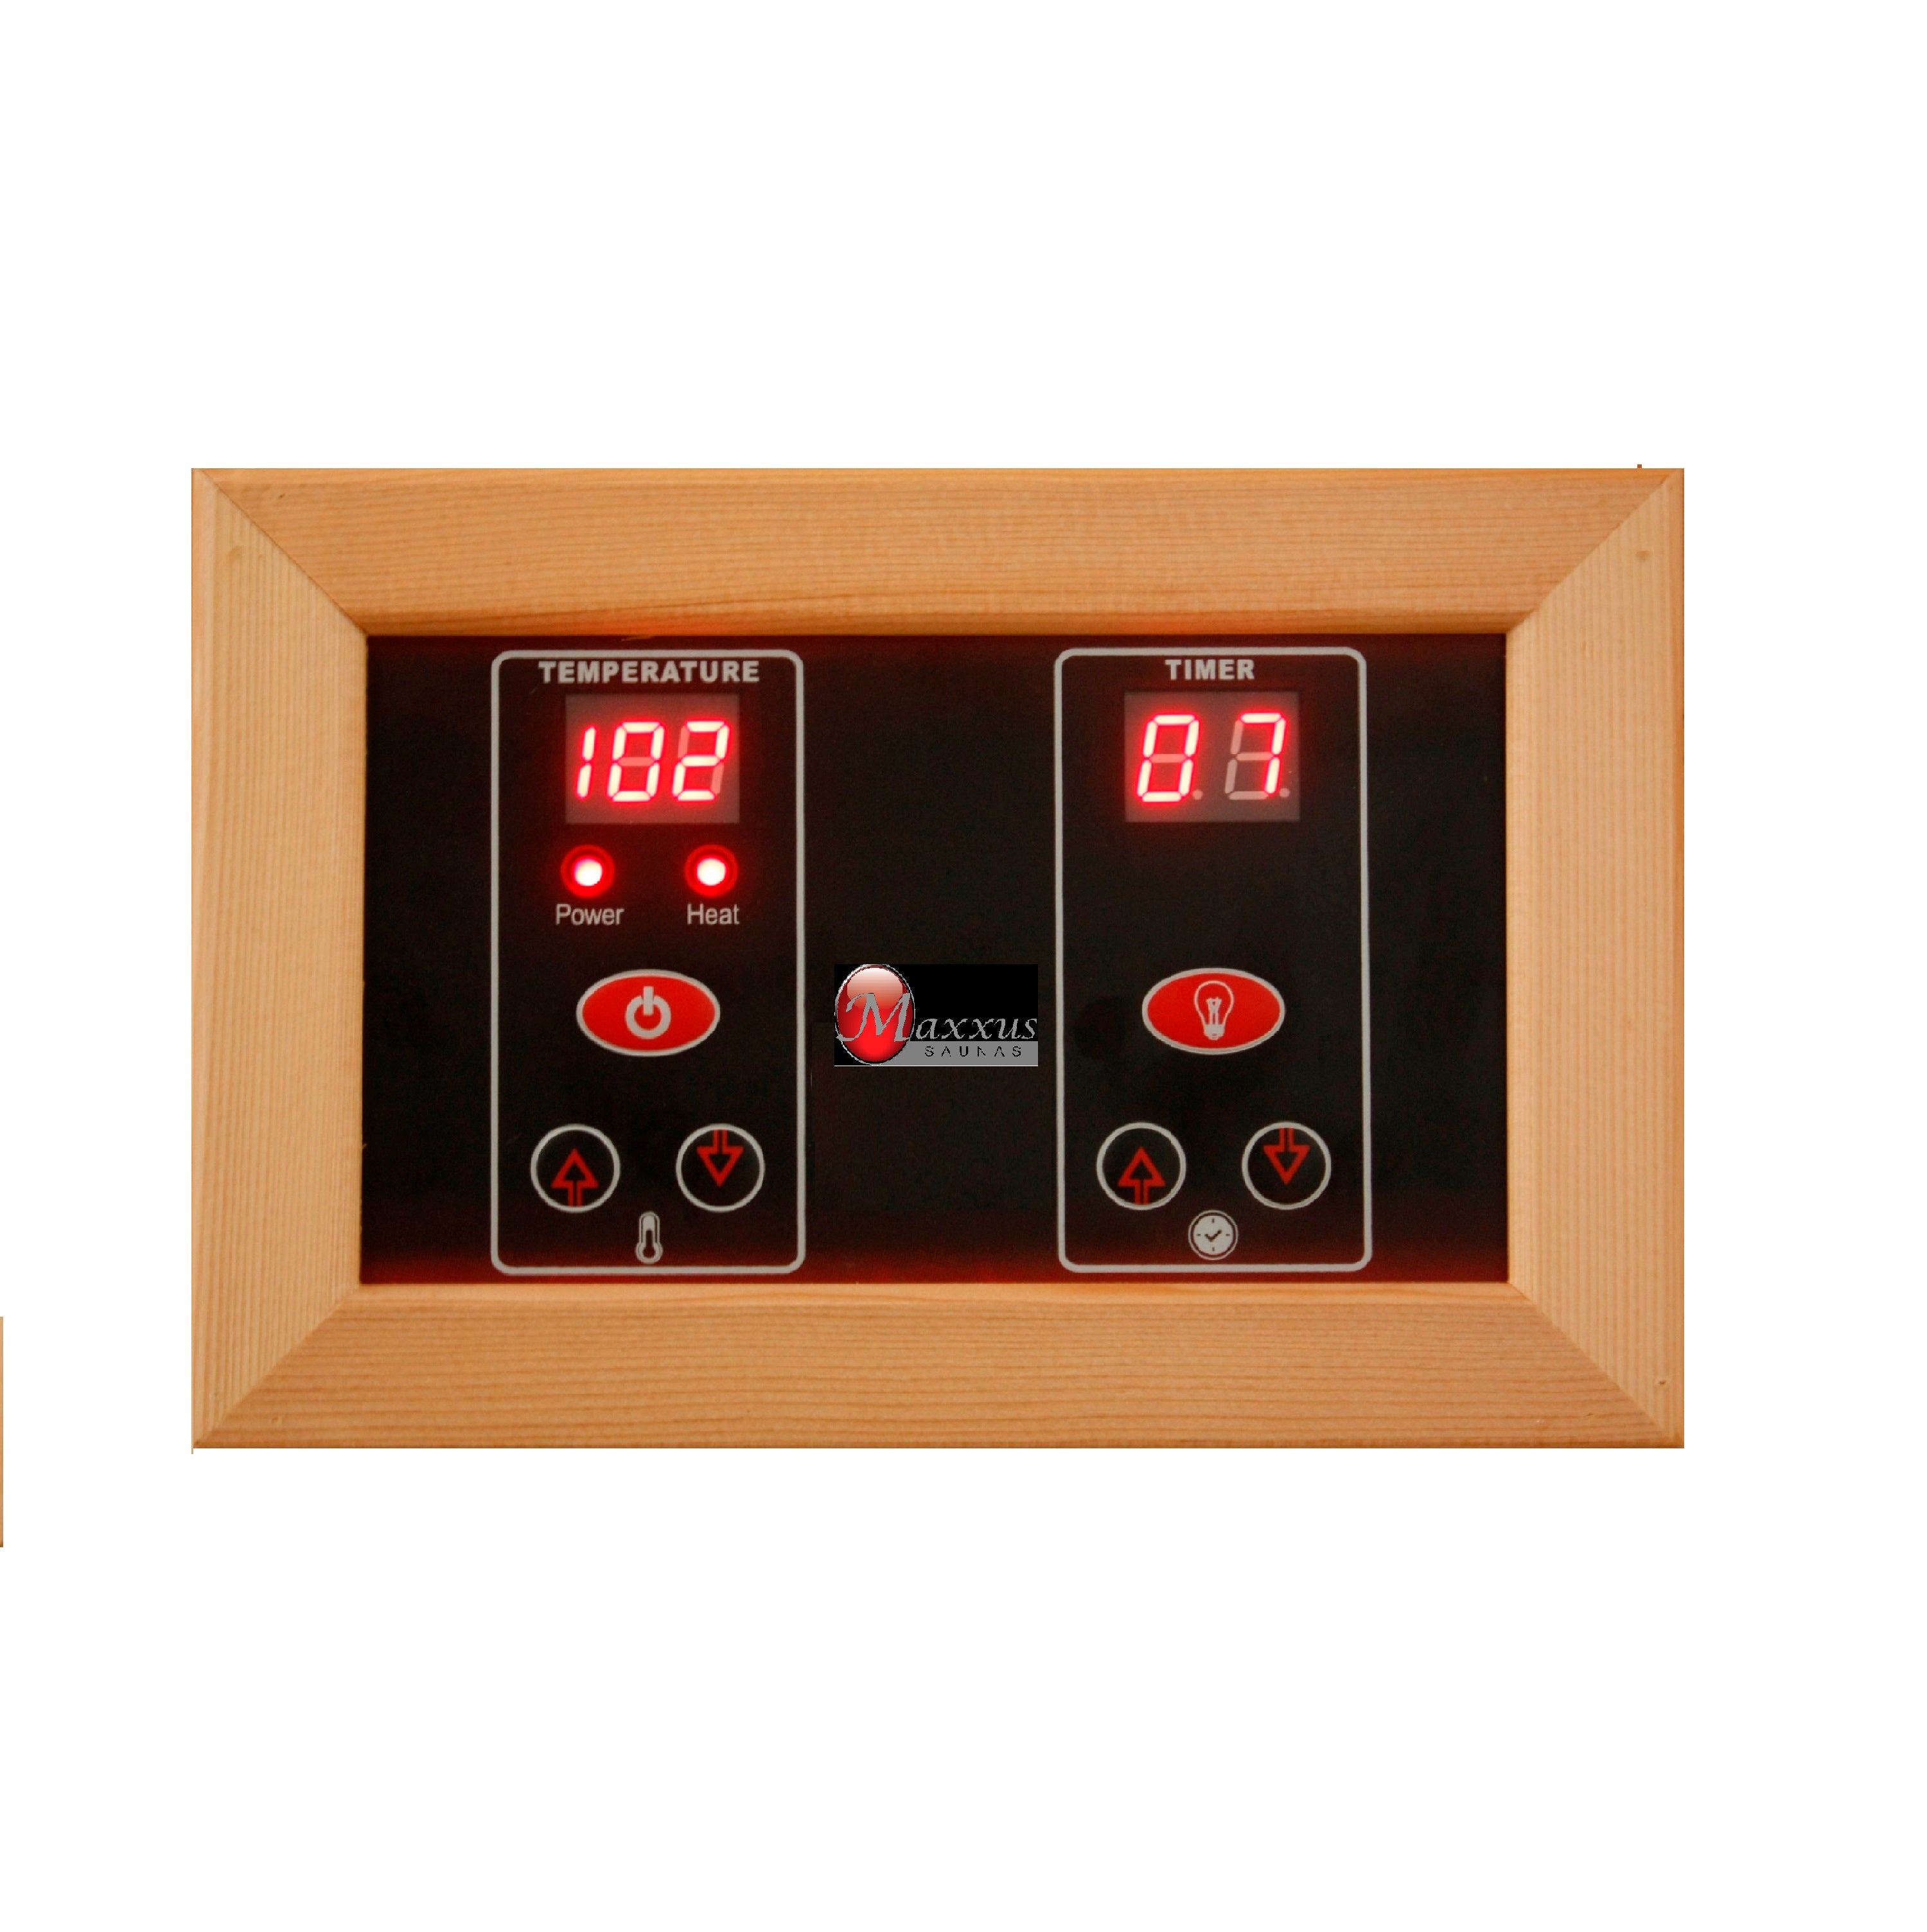 A wooden panel with two digital clocks on it, featuring the Maxxus Saunas brand and free from EMF emissions, showcasing the Maxxus 2-Person Full Spectrum Near Zero EMF FAR Infrared Sauna (Canadian Red Cedar).